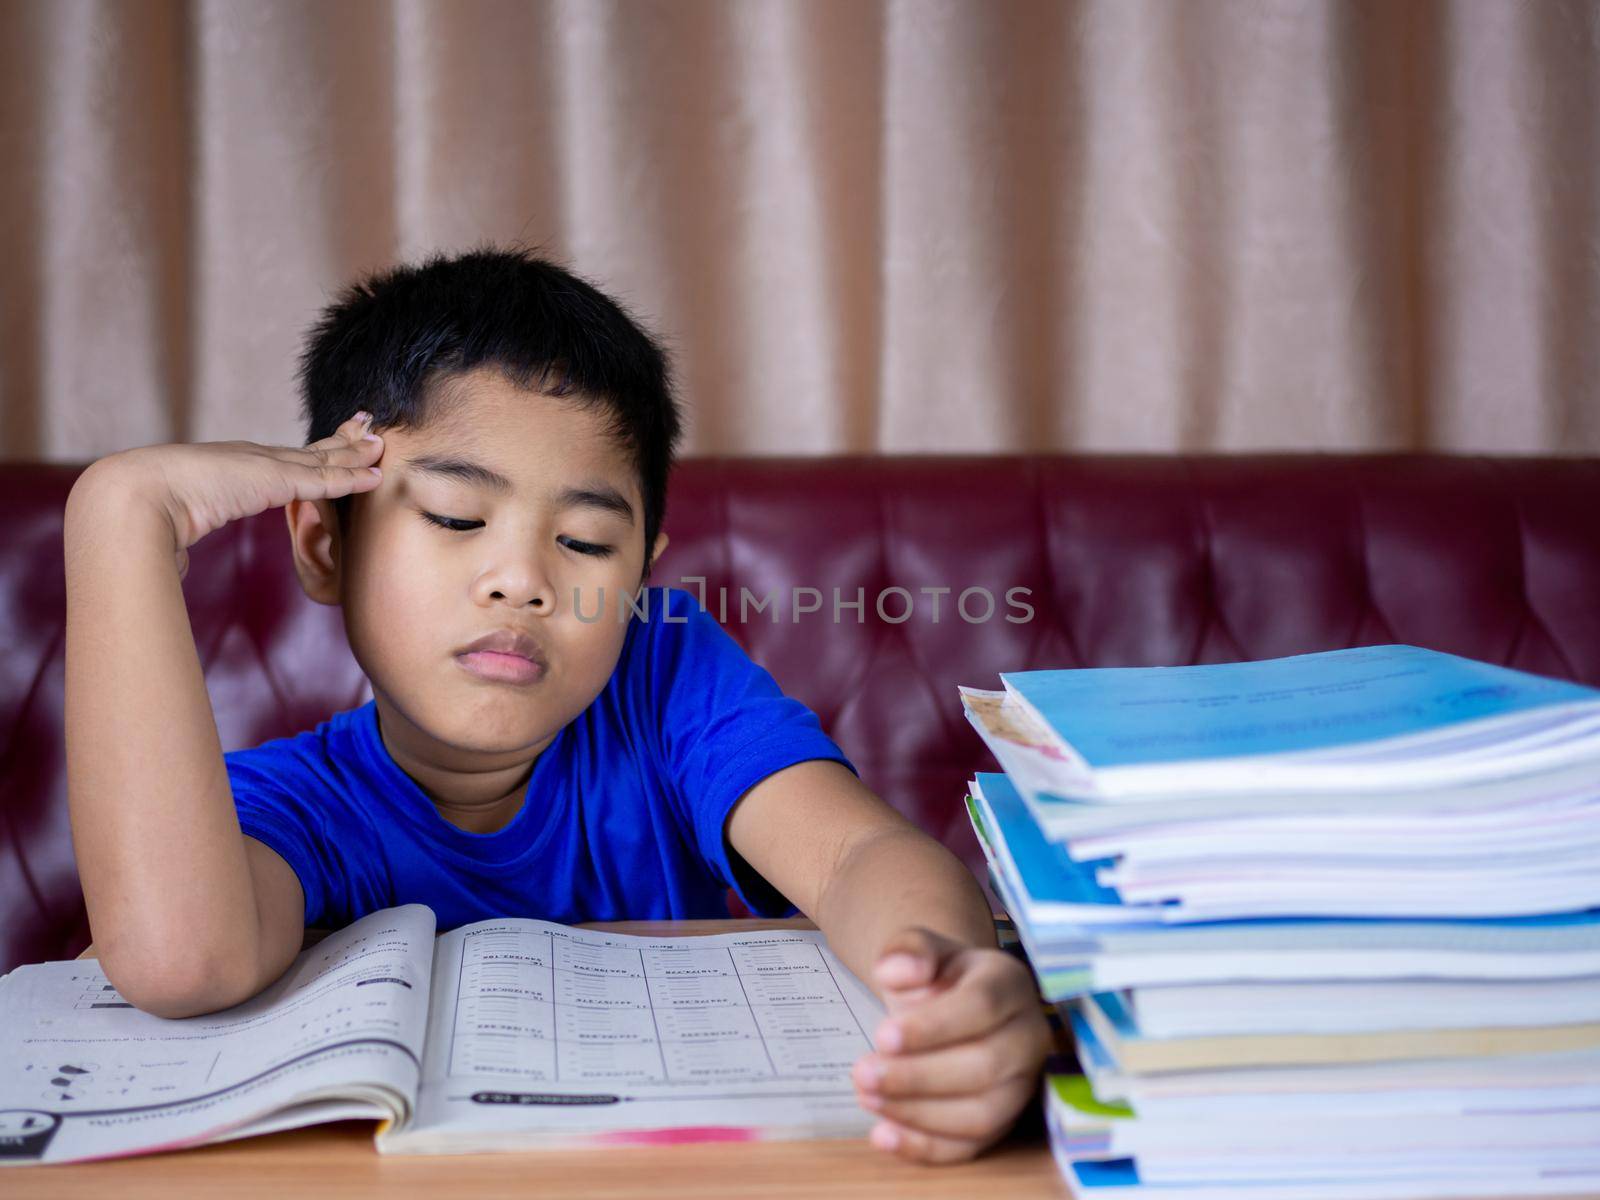 A boy is tired of reading a book on a wooden table. with a pile of books beside The background is a red sofa and cream curtains.